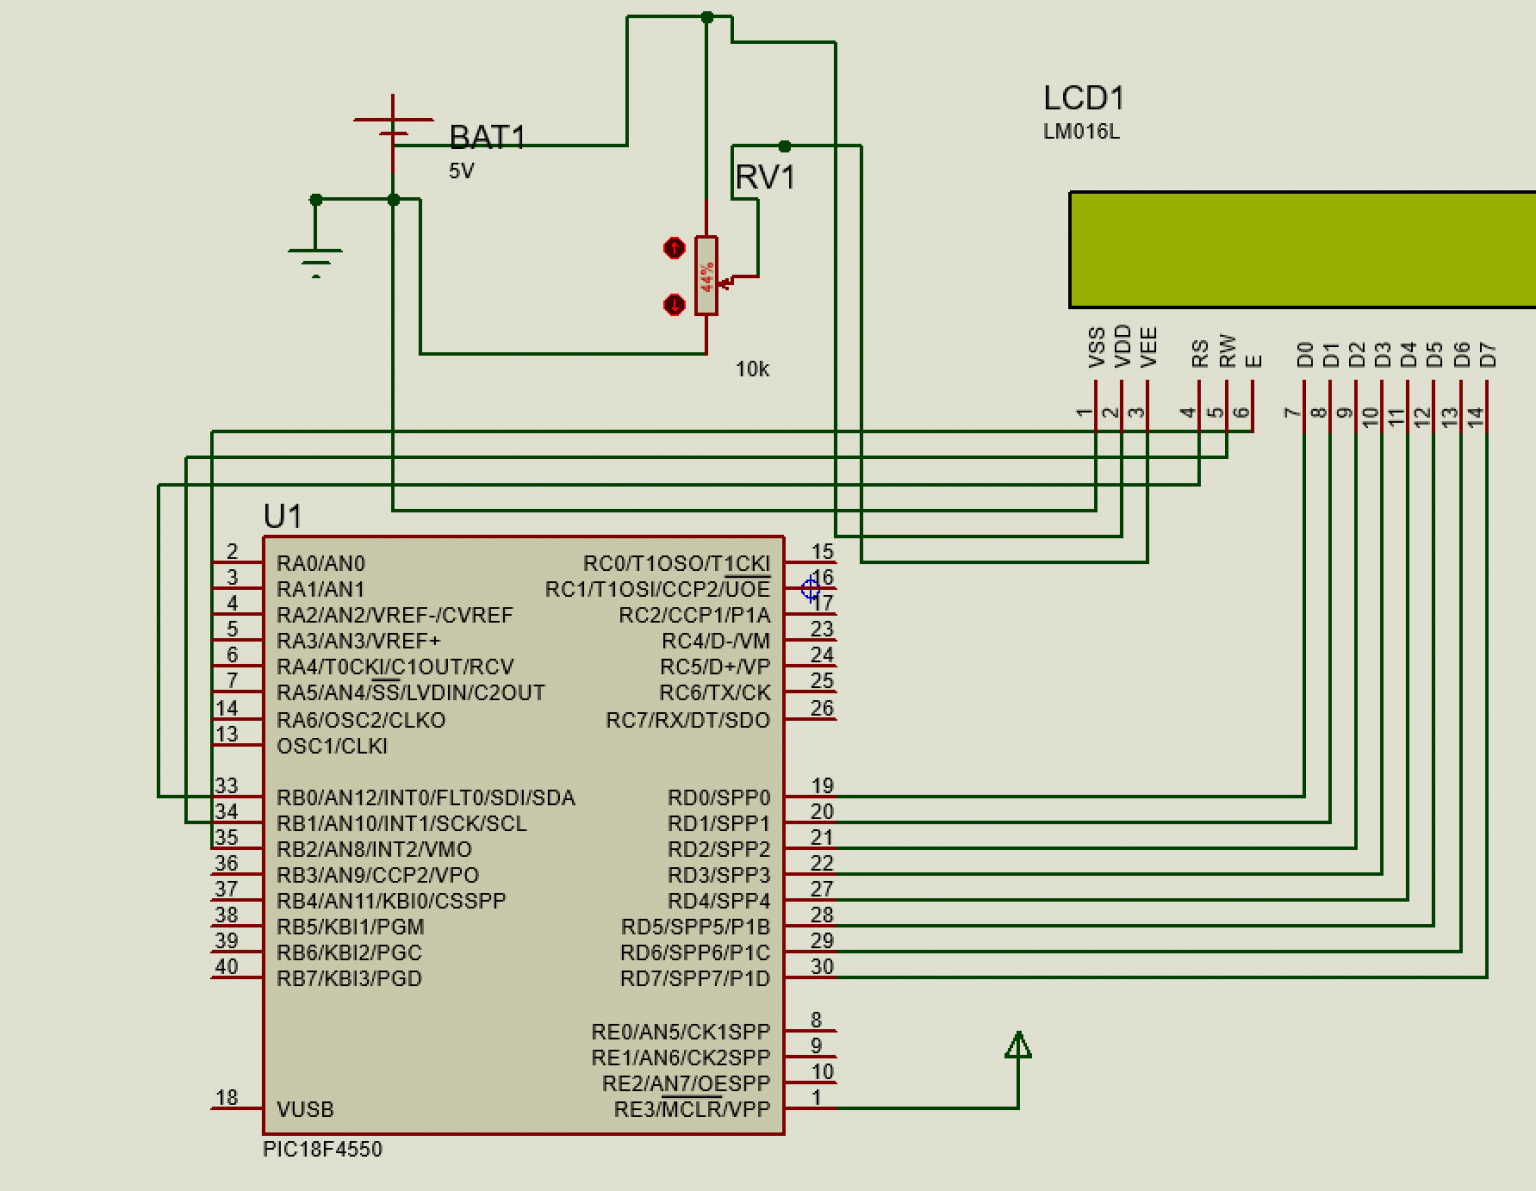 How To Interface Lcd With Pic18f4550pic16f877a Microcontroller Ee Vibes 7590